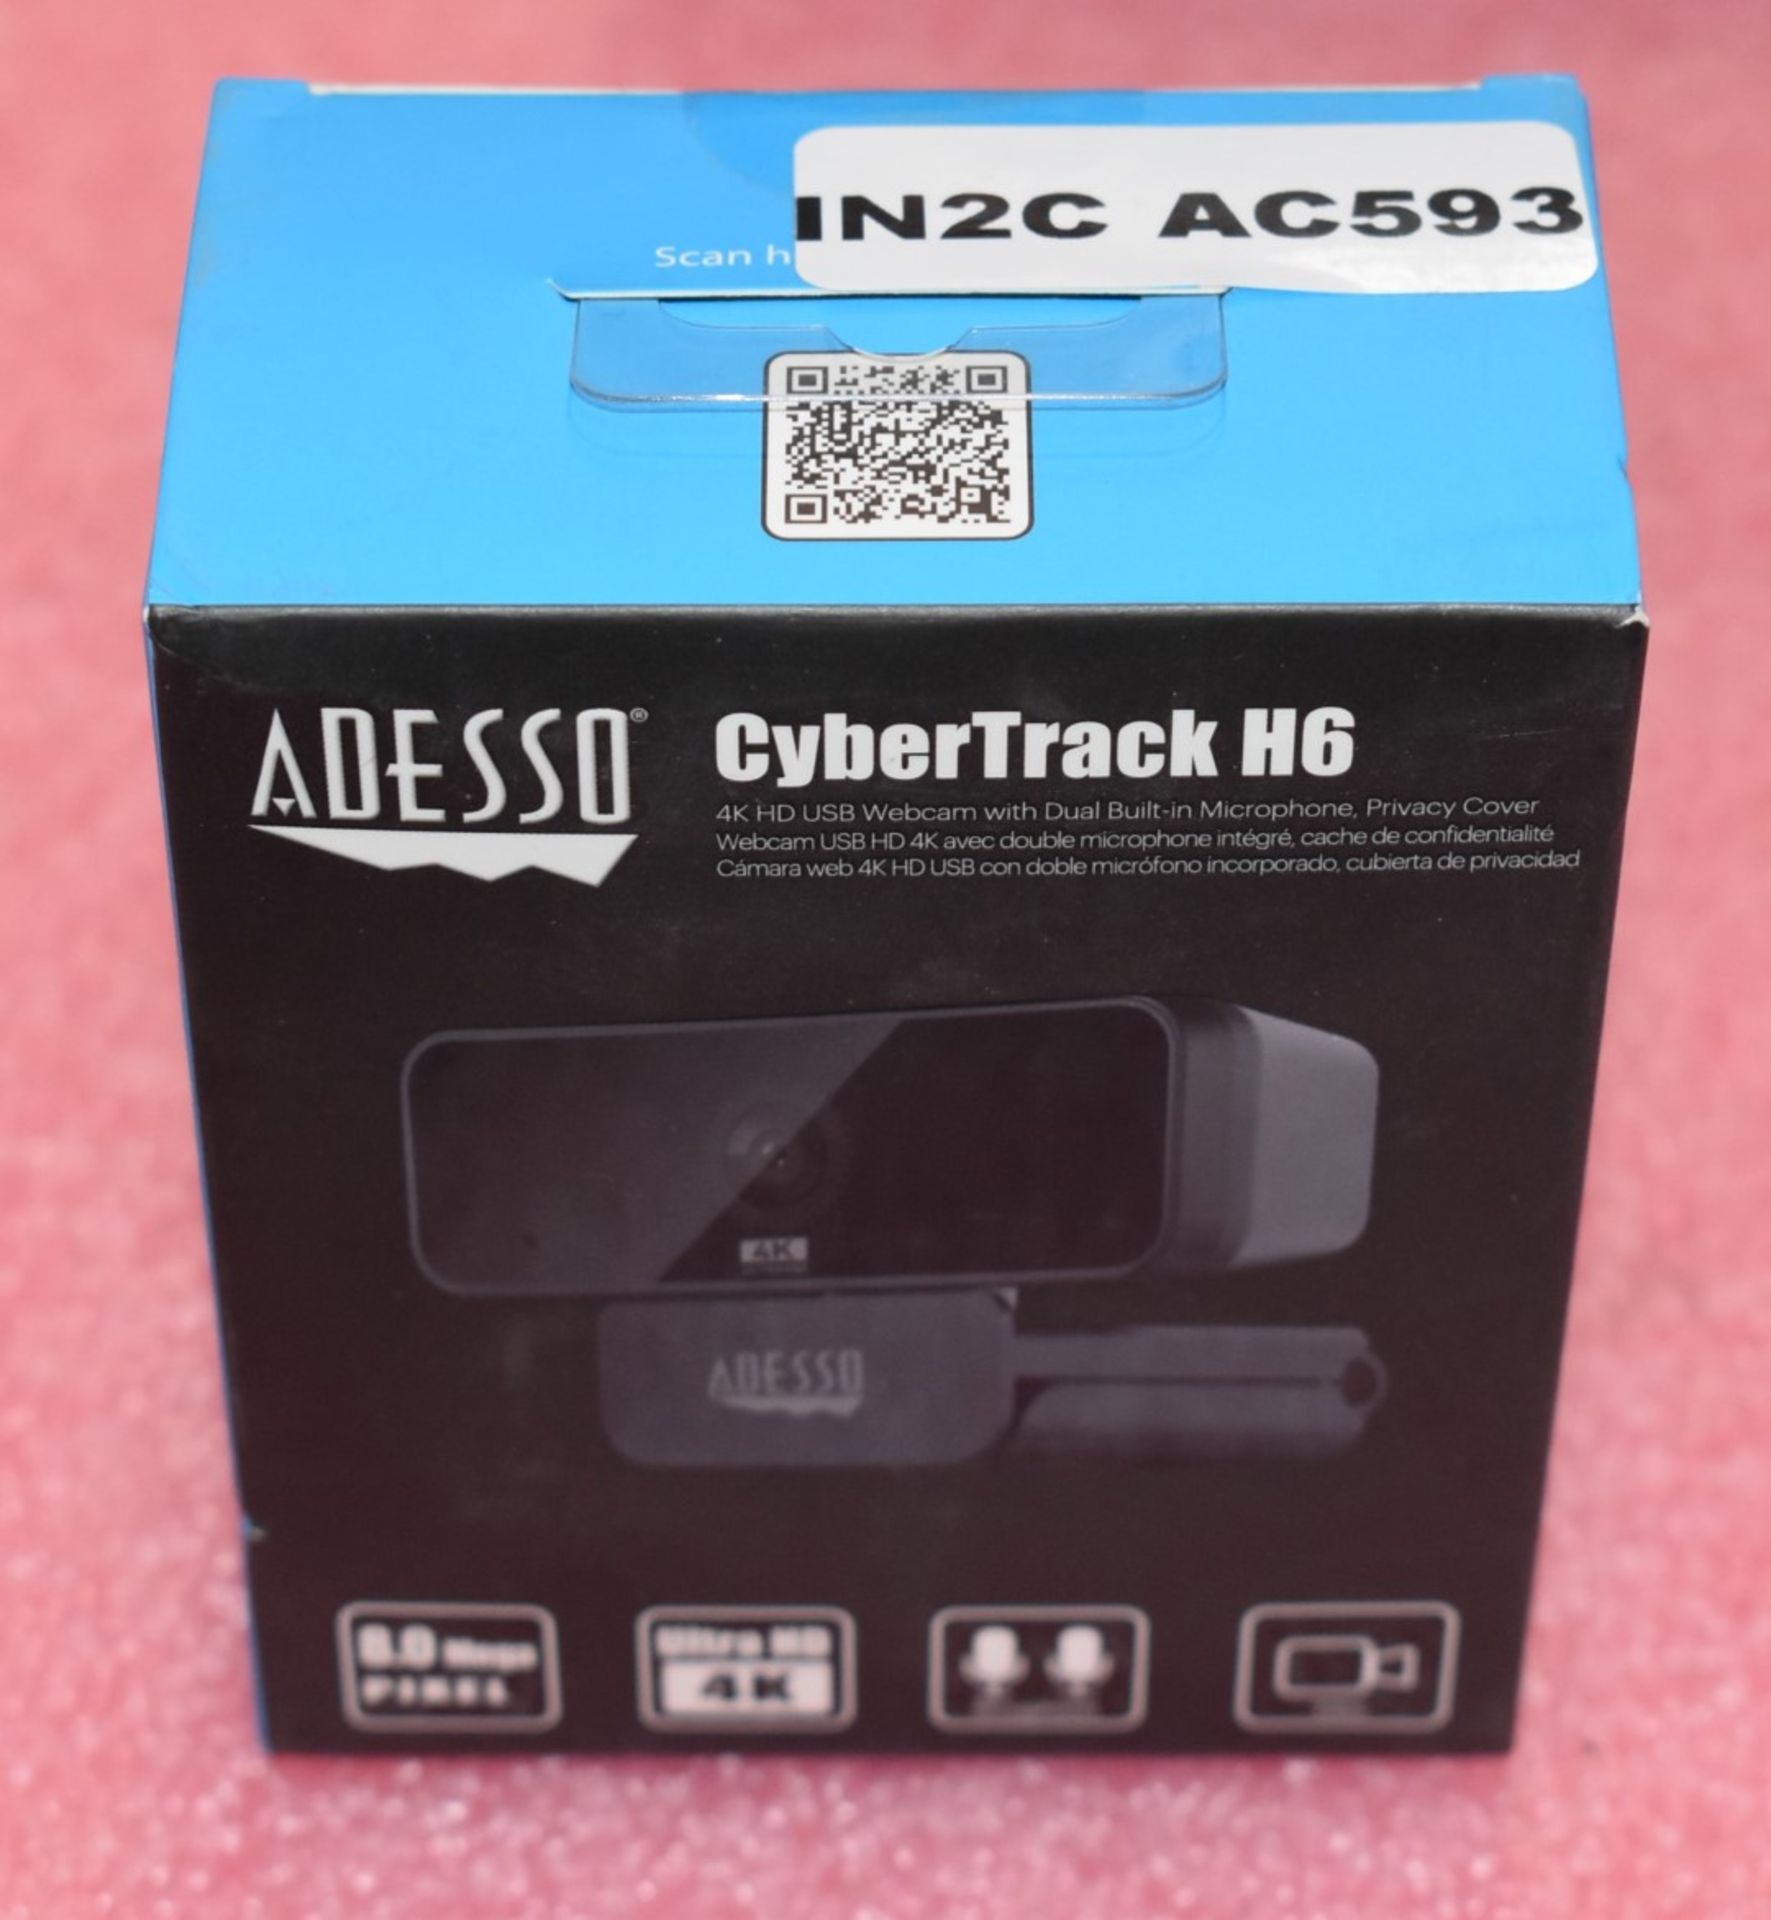 1 x Adesso CyberTrack H6 4K HD Webcam - New Boxed Stock - Image 2 of 4